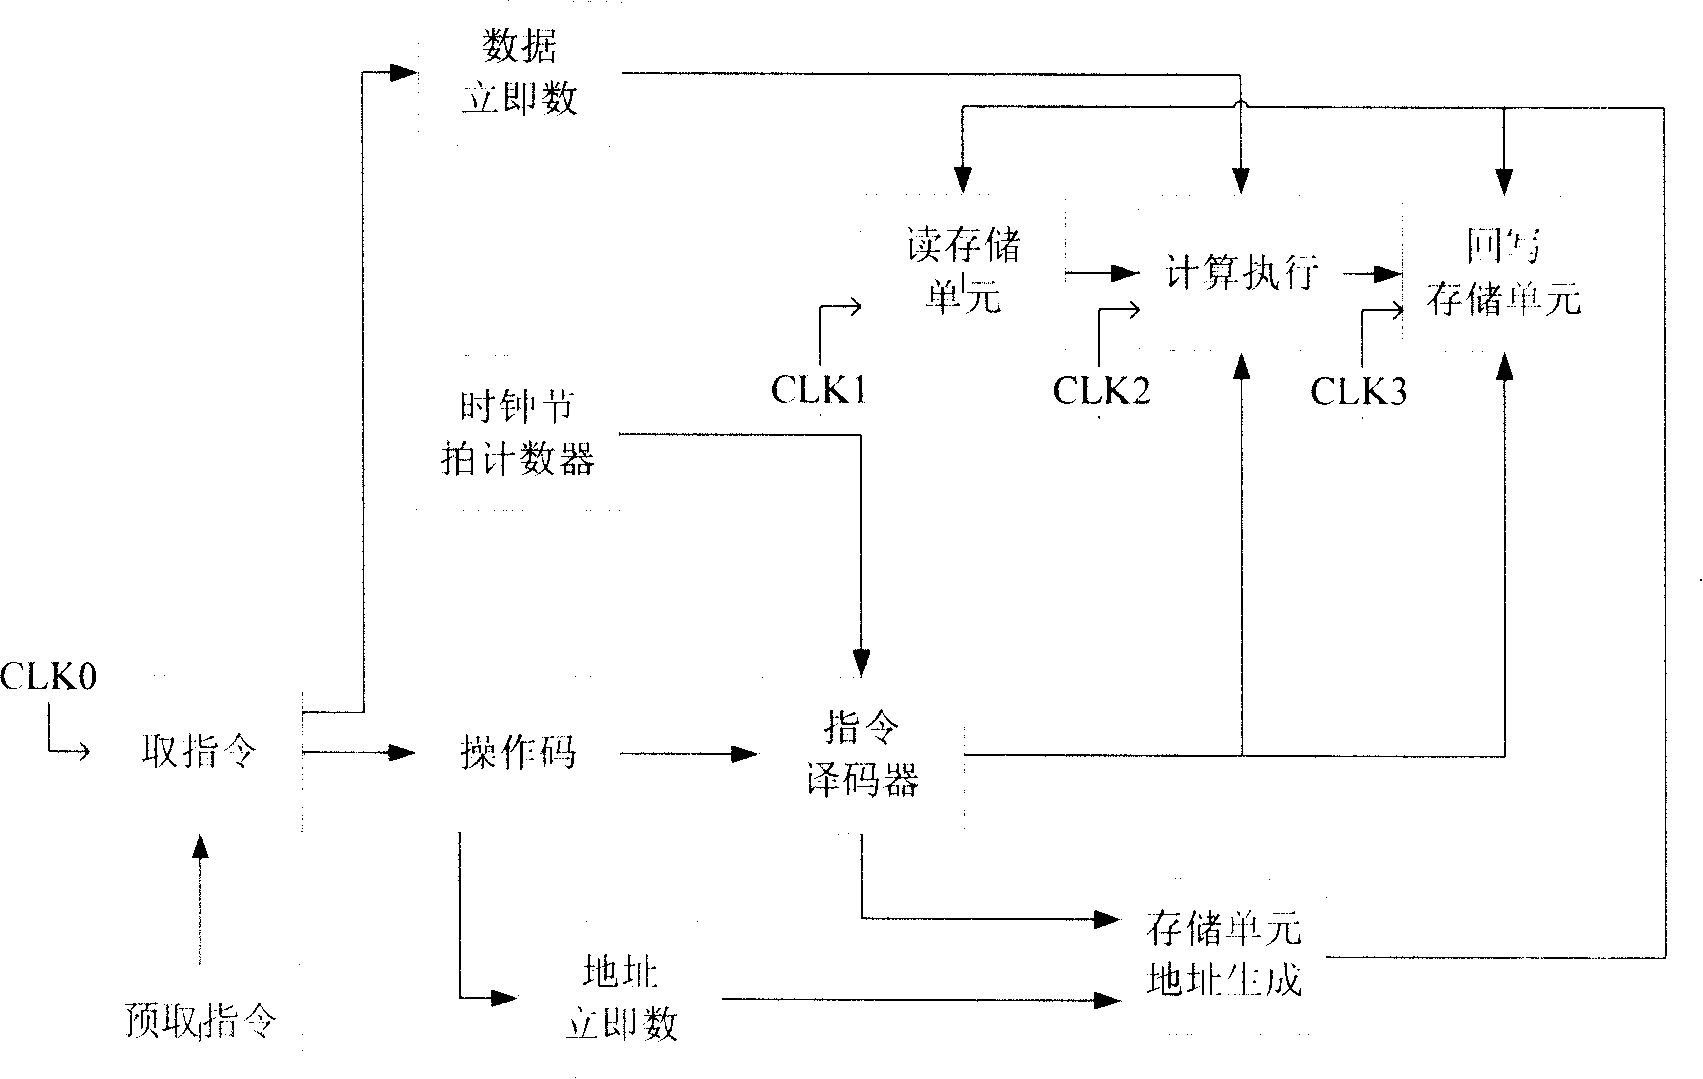 Microprocessor structure based on sophisticated vocabulary computerarchitecture